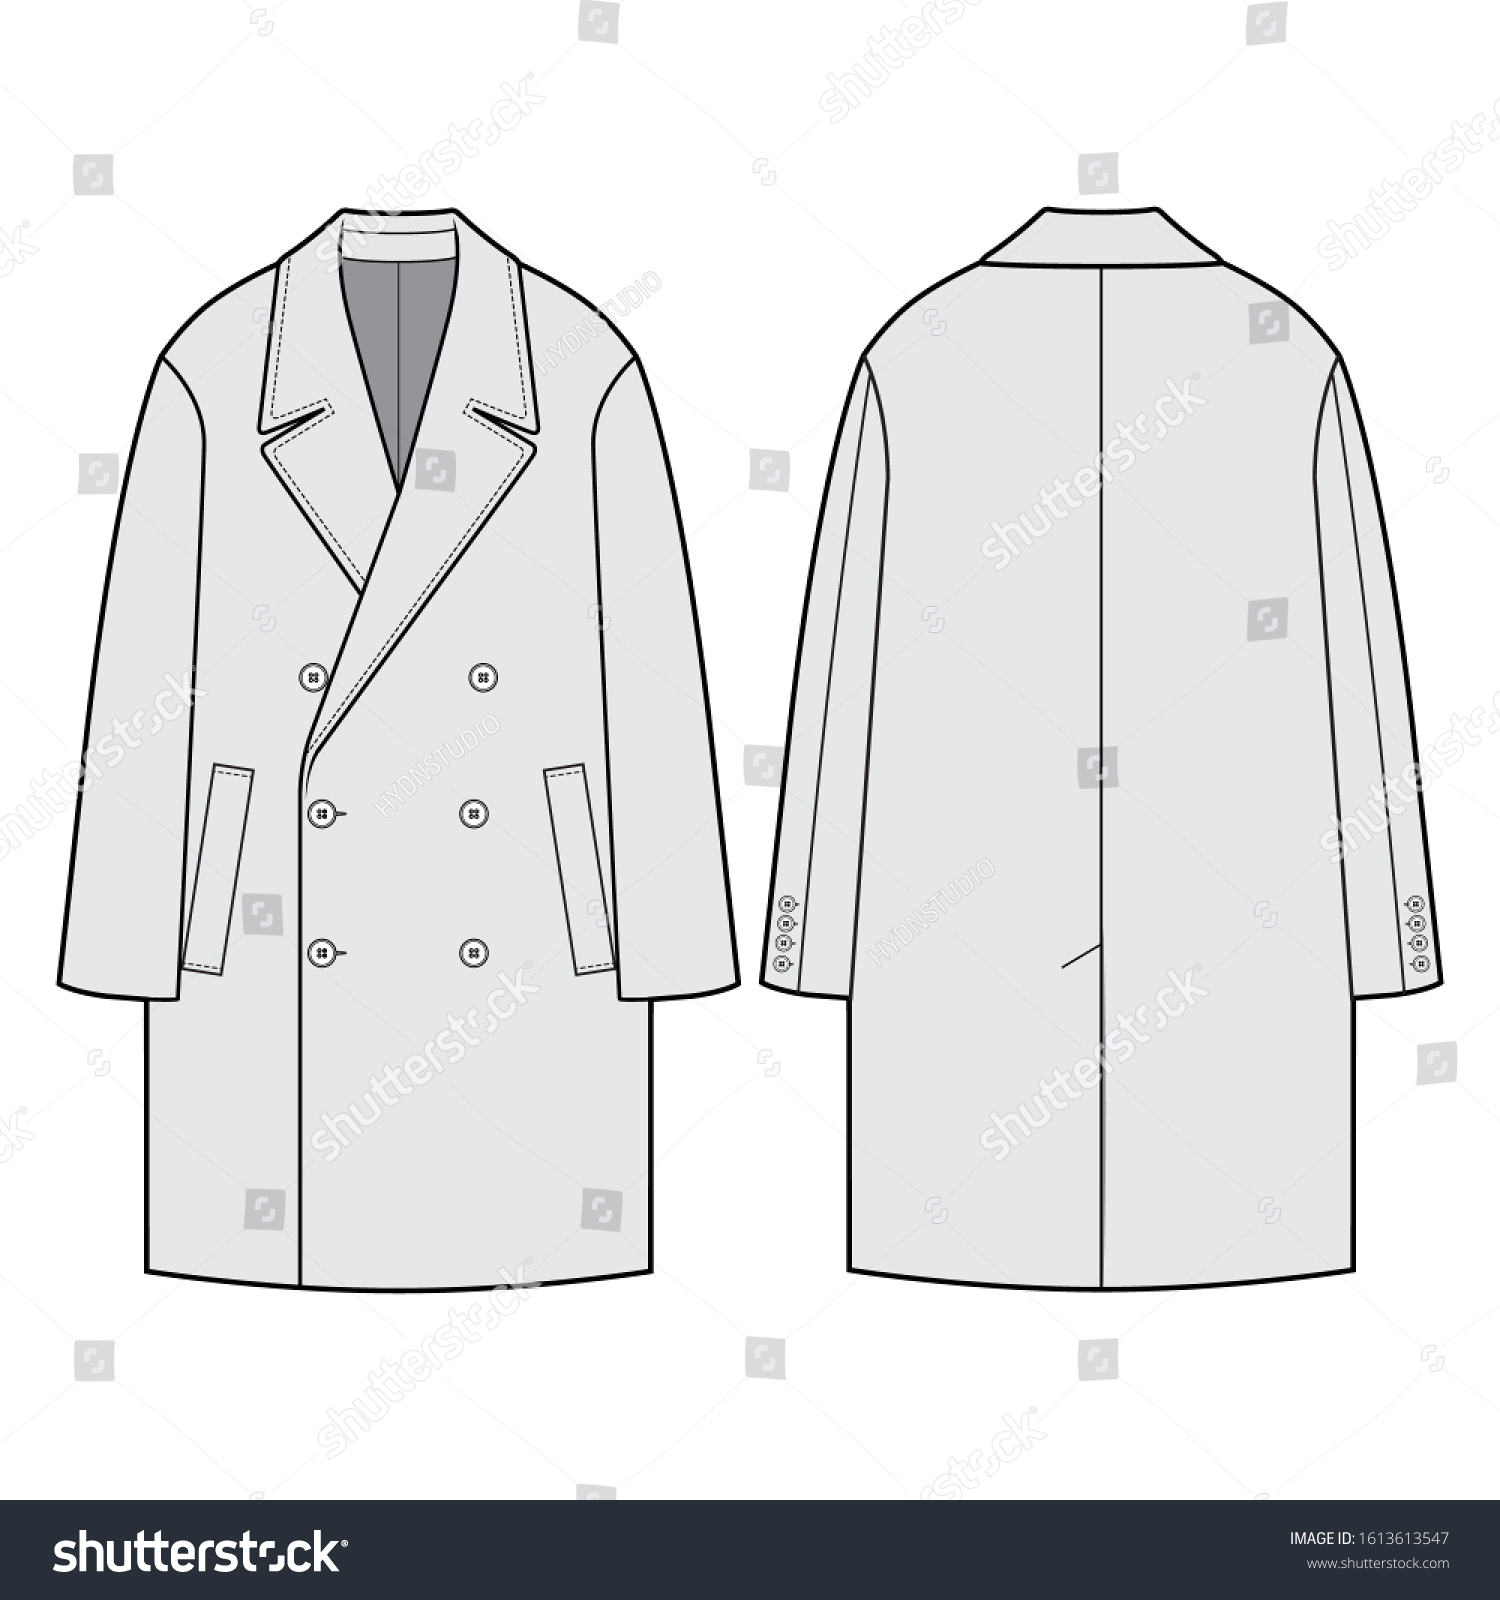 902 Double breasted coat Images, Stock Photos & Vectors | Shutterstock